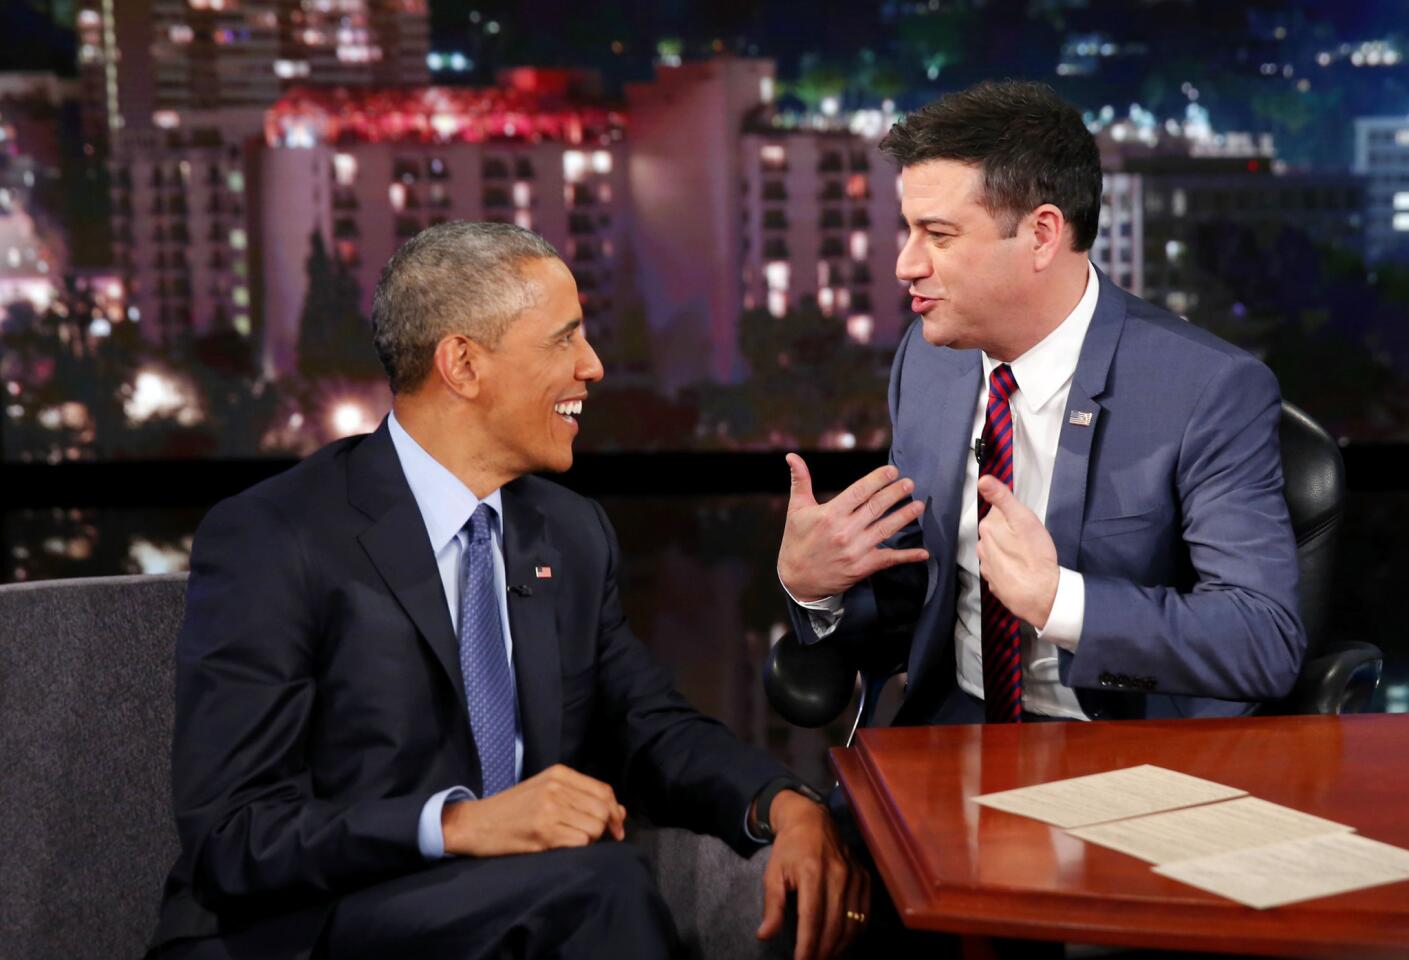 President Obama talks with Jimmy Kimmel during a commercial break at ABC Studios.